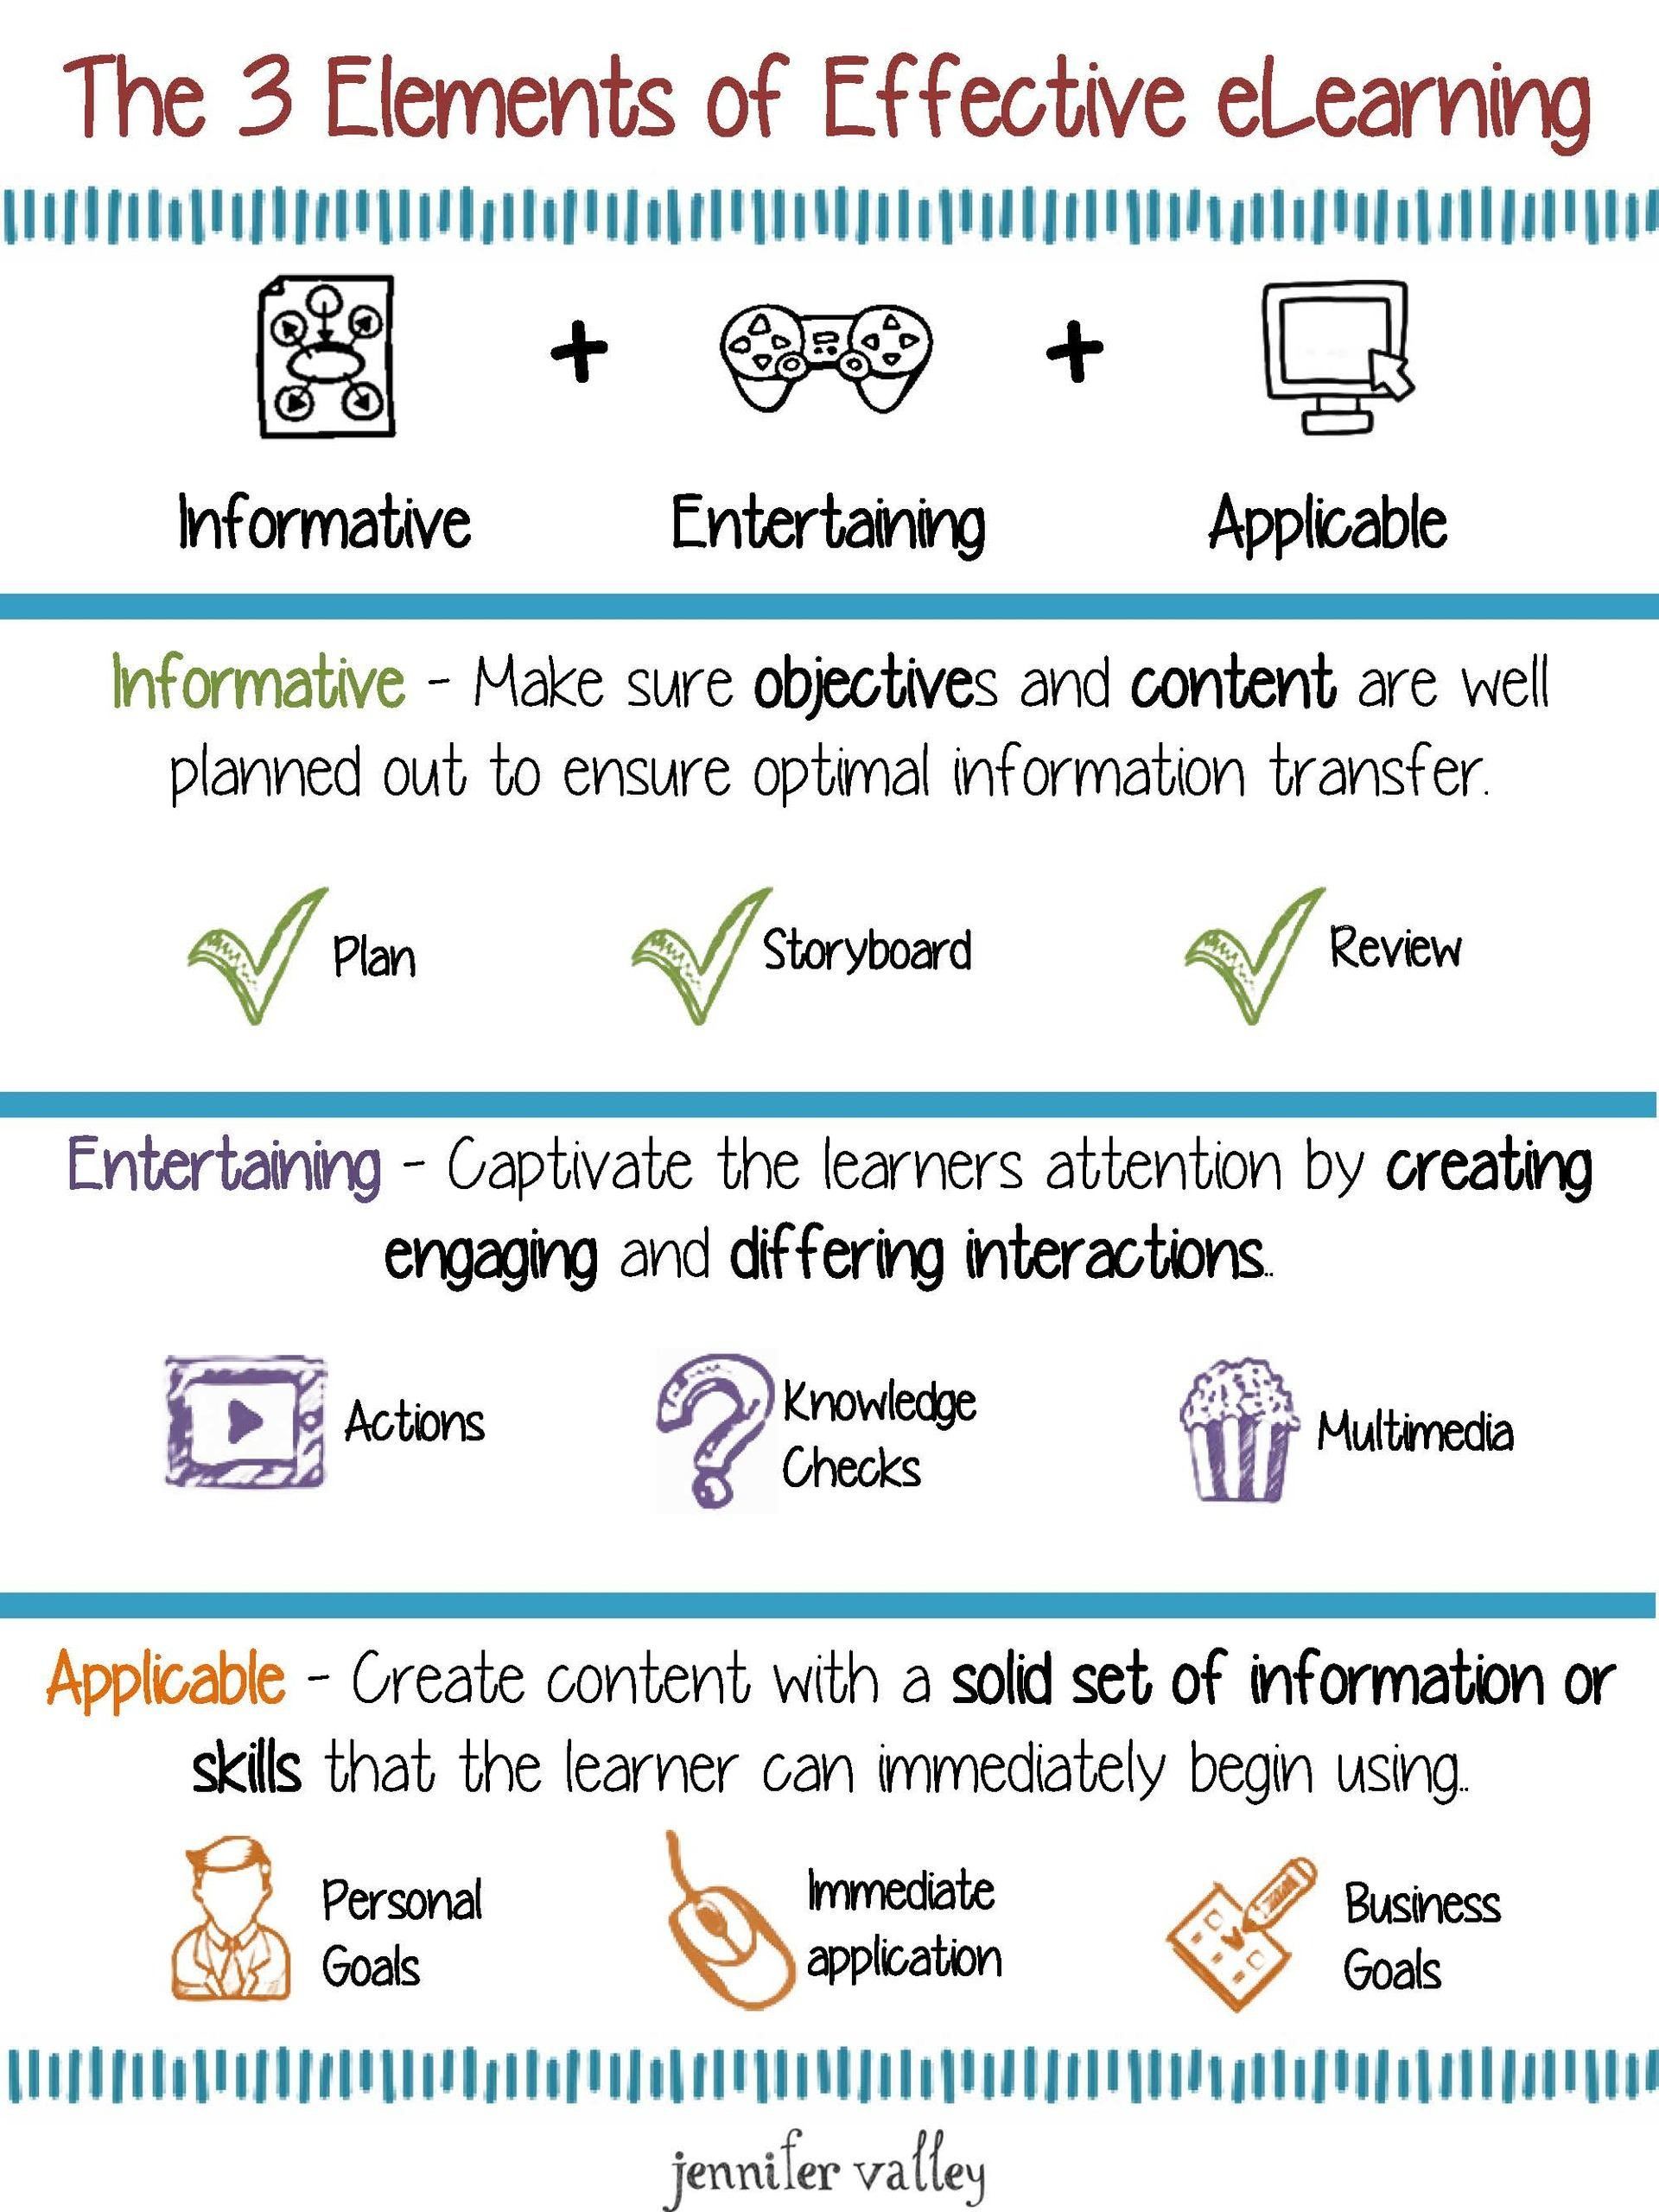 The 3 Elements Of Effective Elearning Infographic